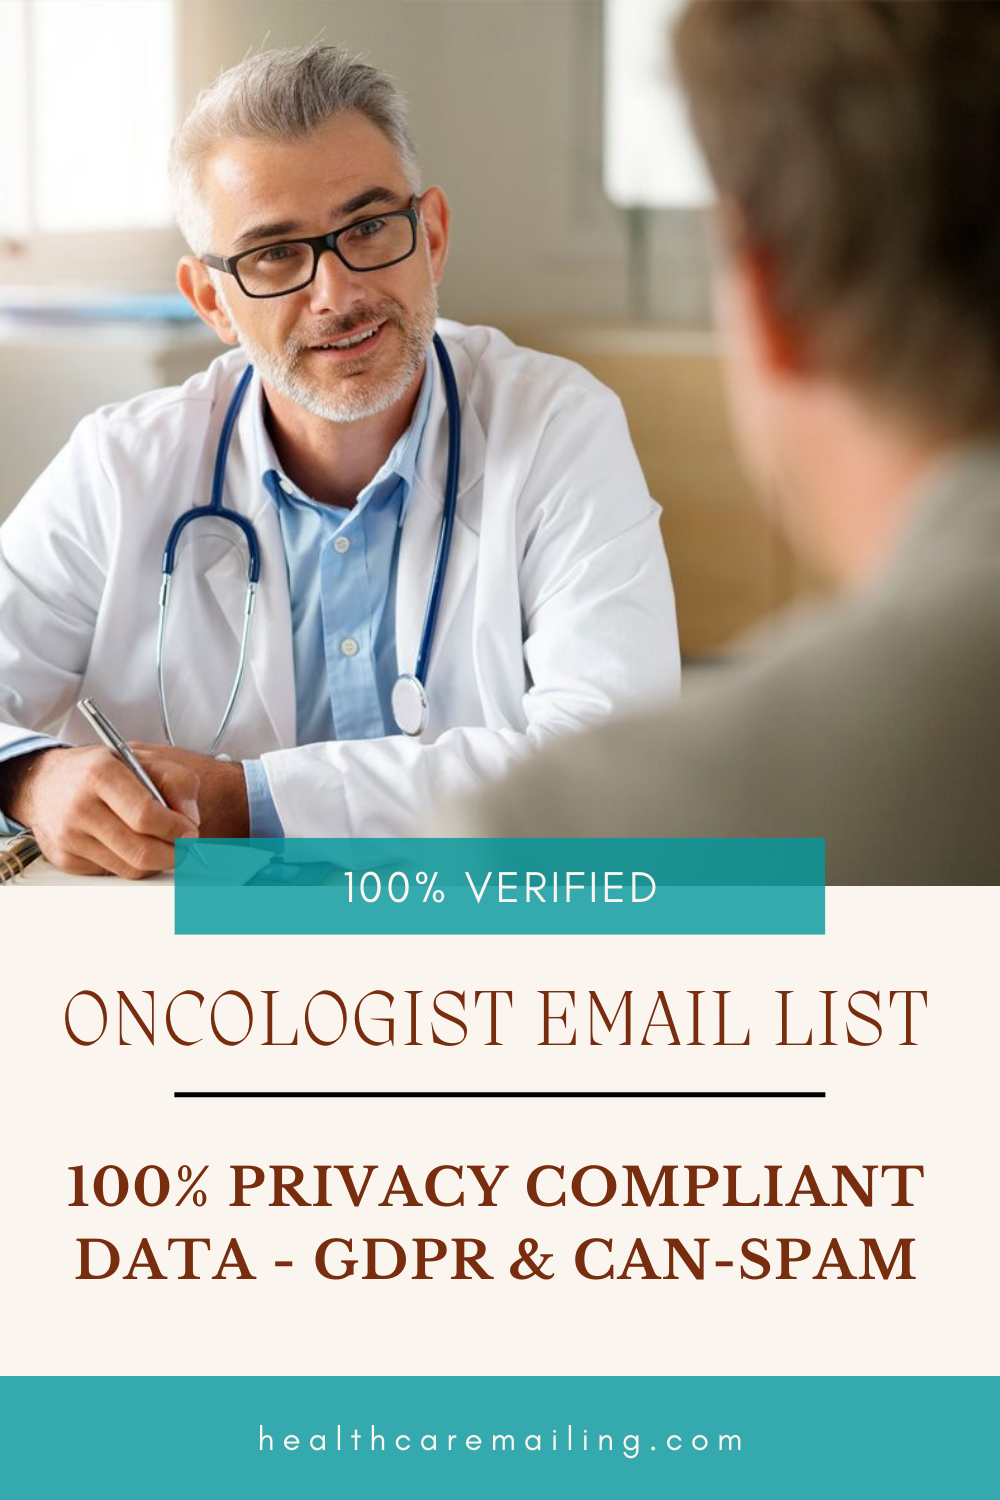 Oncologist Email List - Mailing List of Oncologists in the USA